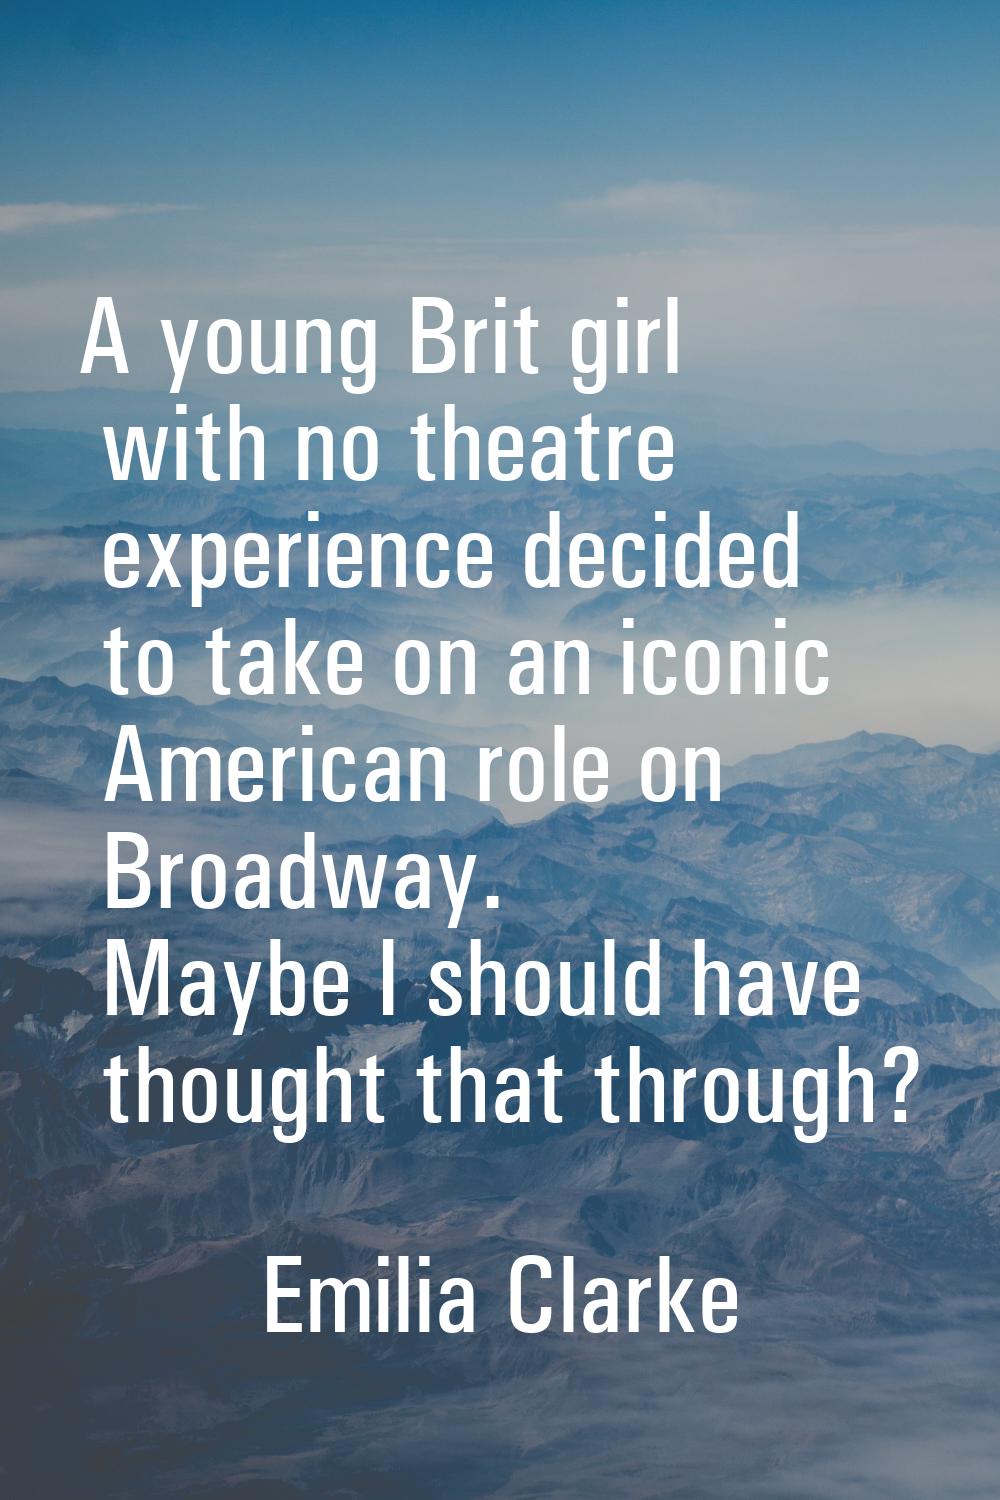 A young Brit girl with no theatre experience decided to take on an iconic American role on Broadway